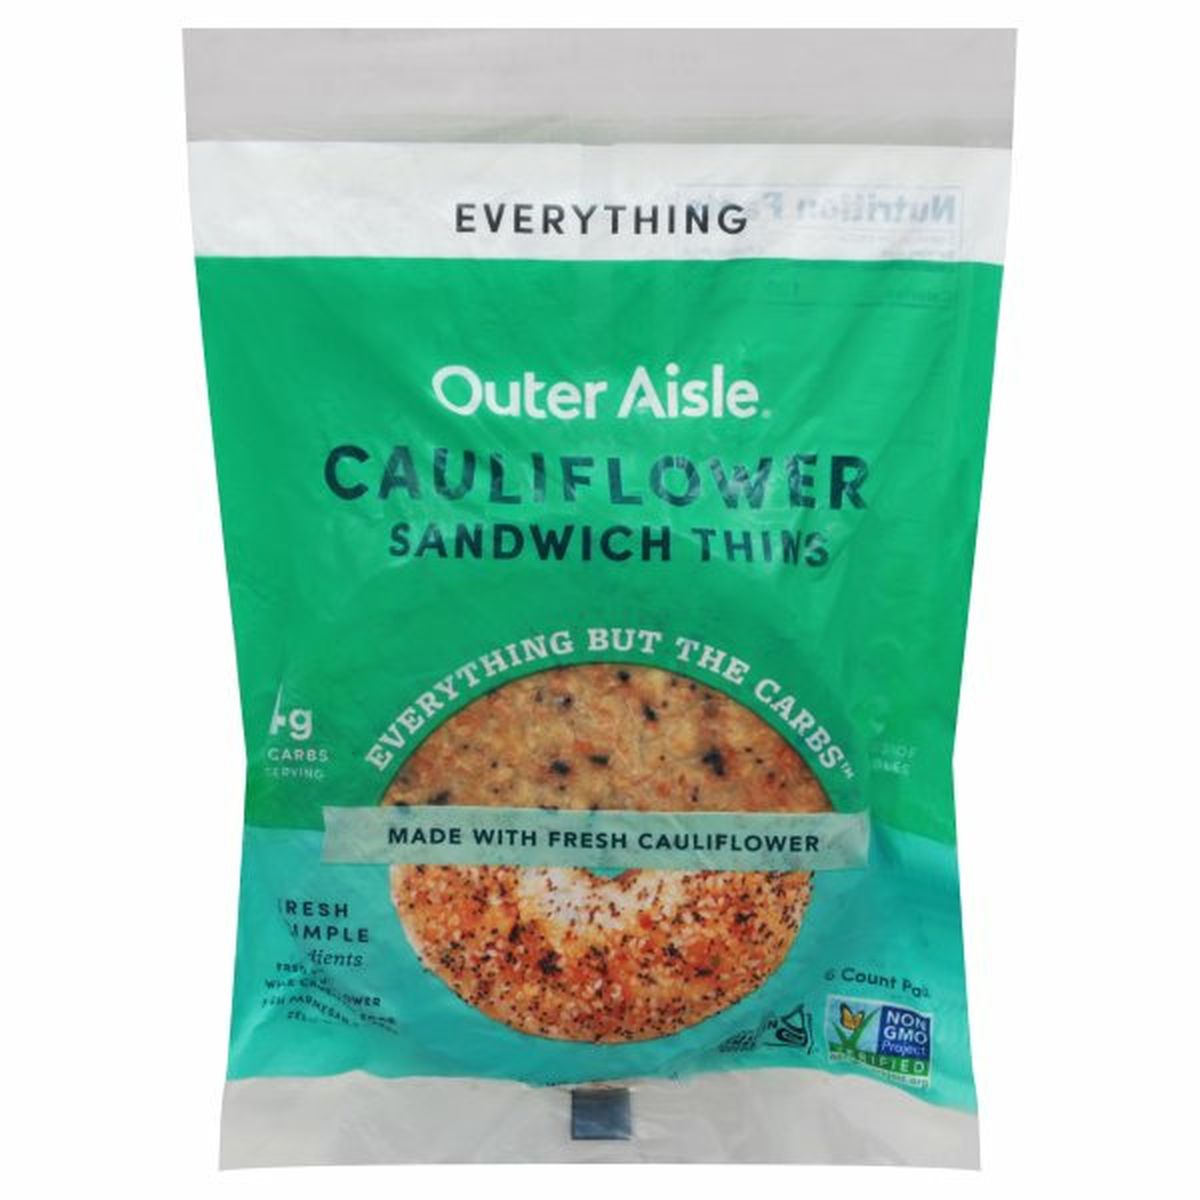 Calories in Outer Aisle Sandwich Thins, Cauliflower, Everything